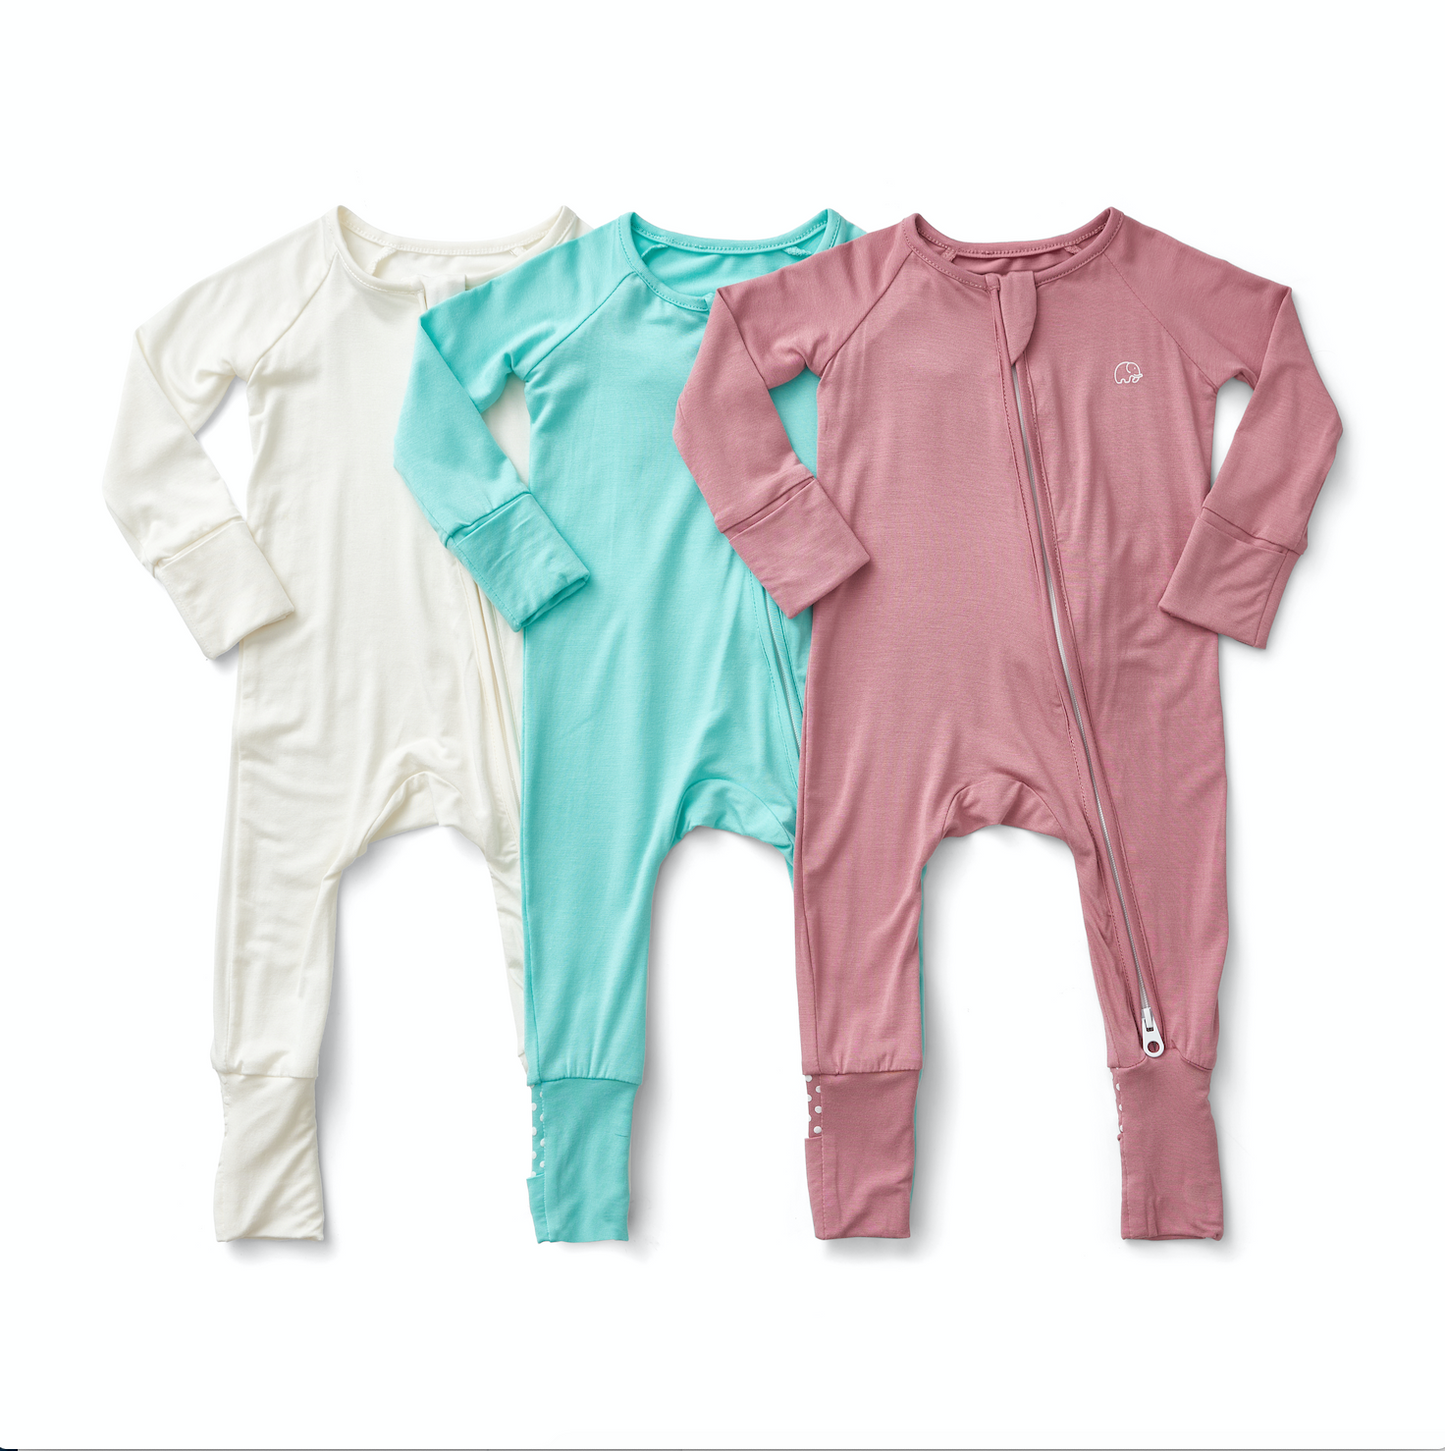 Baby gift set of 3 bamboo zipper sleepsuits - White/Glacier Blue/Lilac